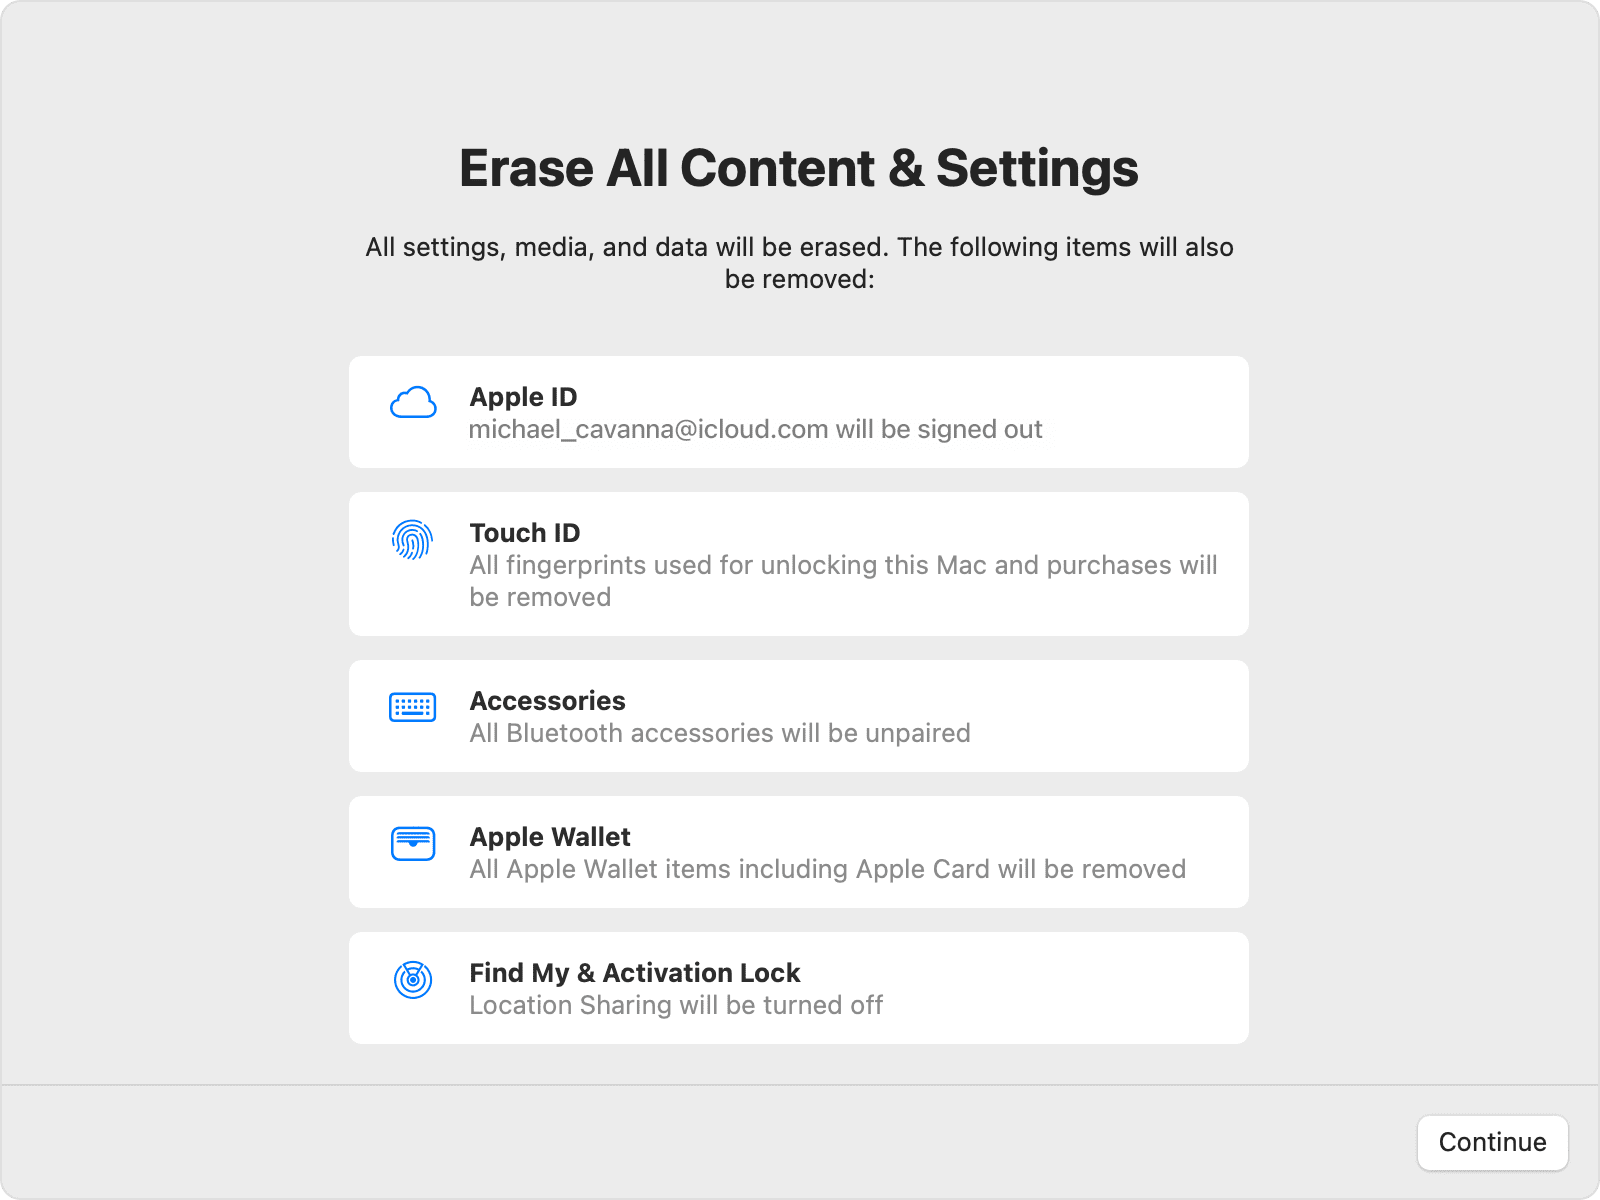 Erase all content and settings on Mac - Apple Support